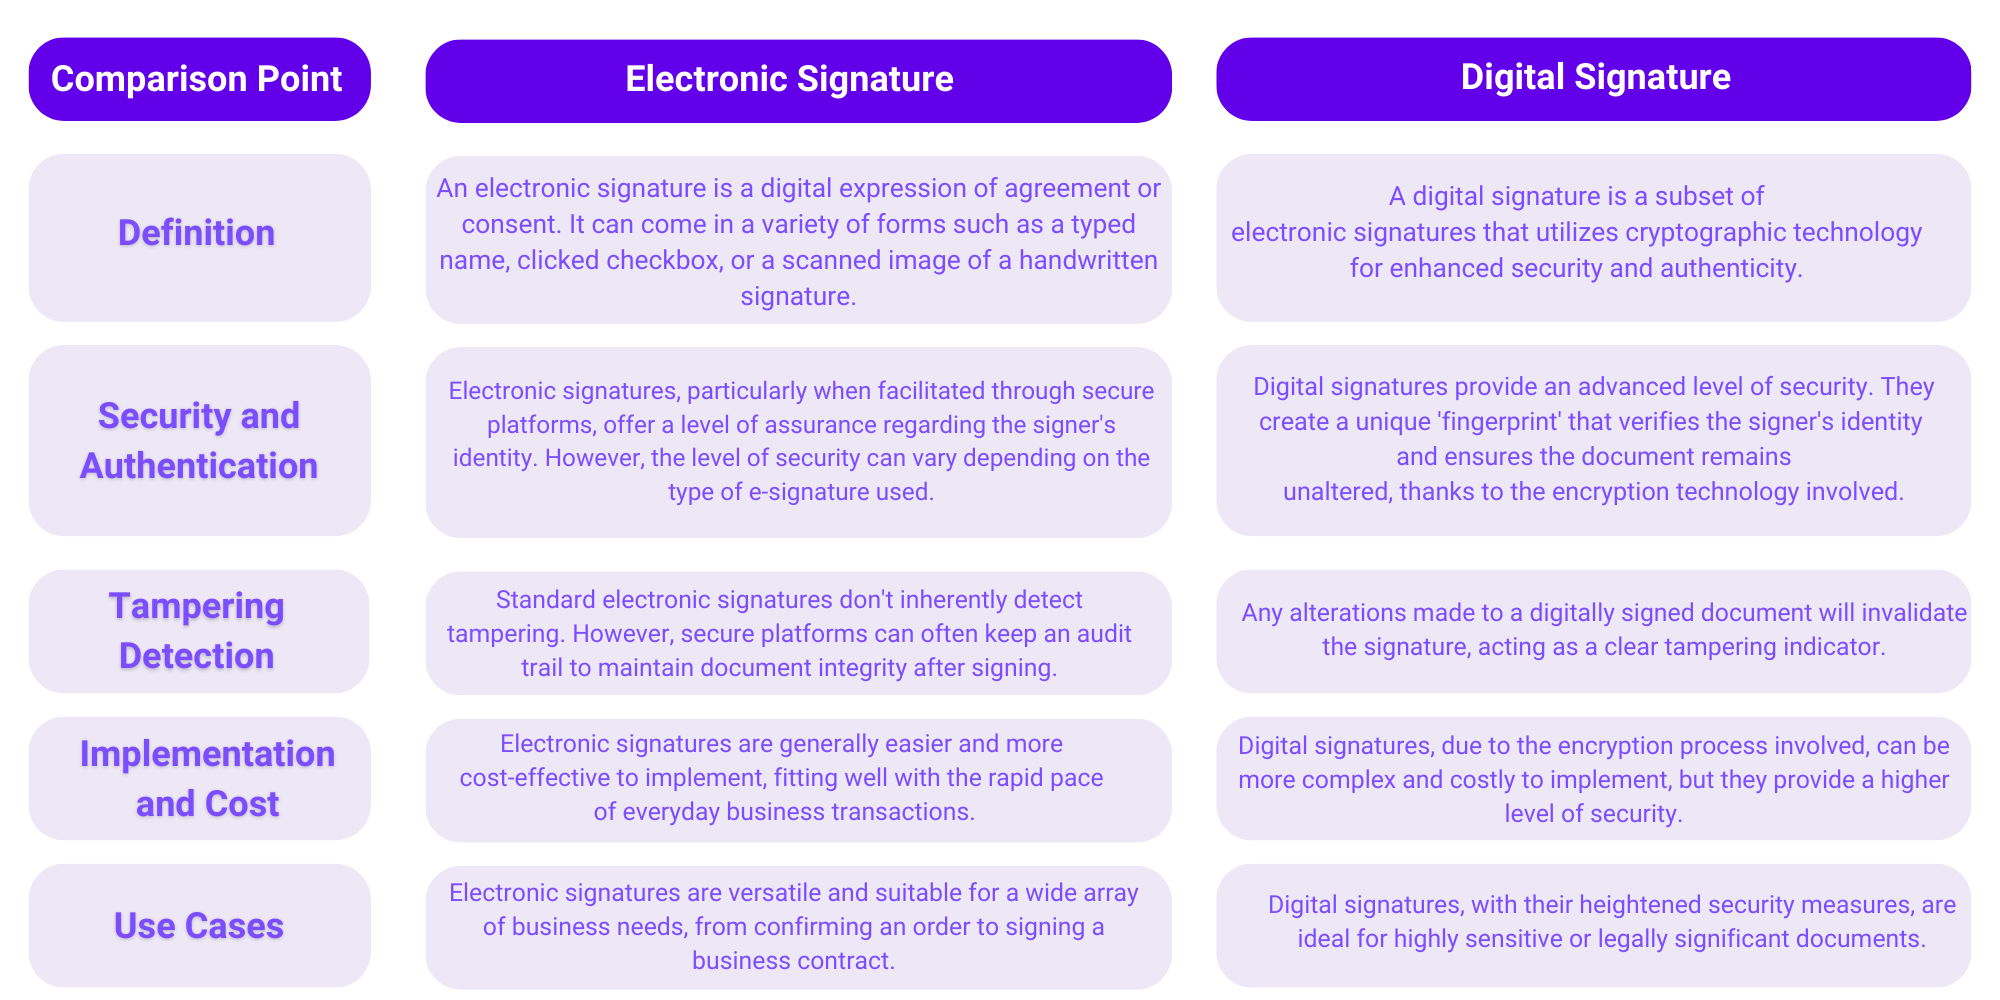 Clear and accessible table showing characteristics of a digital signature vs an electronic signature. The comparison points in the table between a digital signature and an electronic signature are: definition, security and authentication, tampering detection, implementation and cost, and use cases. 